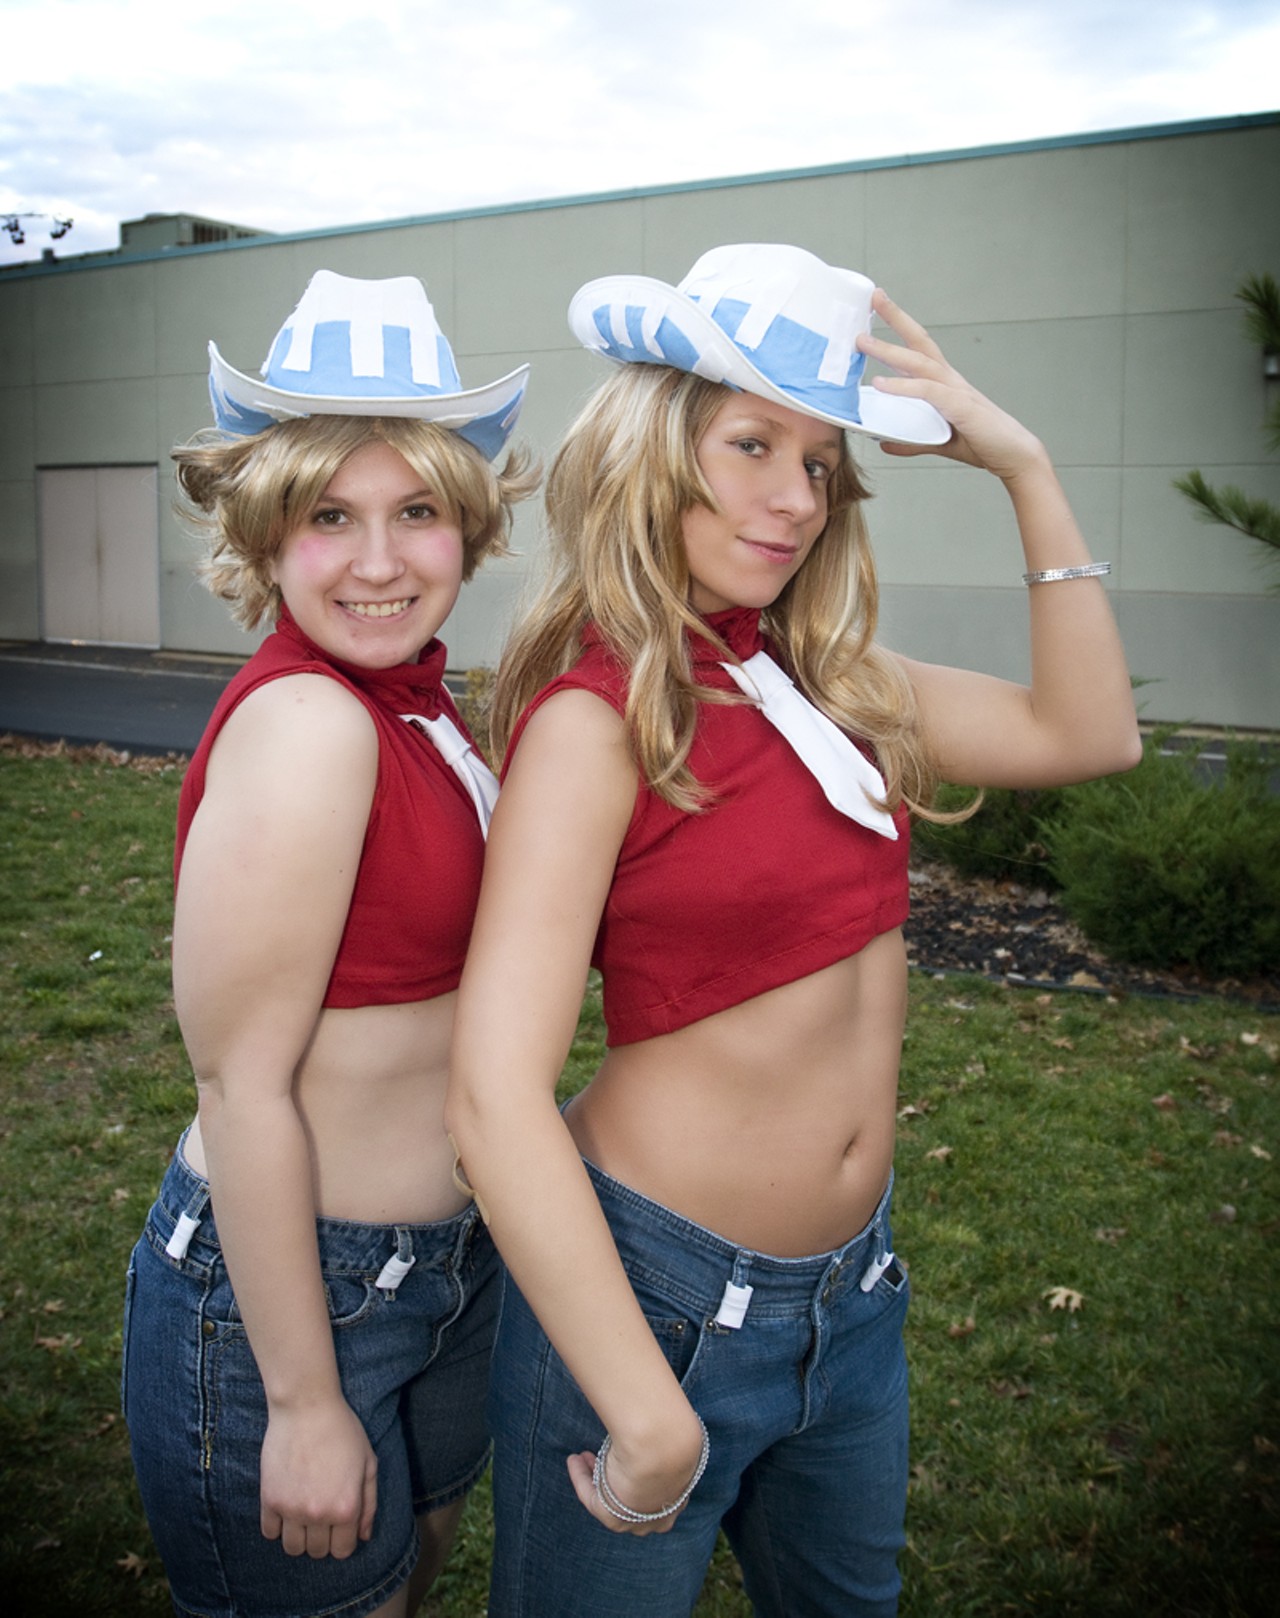 Liz (right) and Patty (left) Thompson from Soul Eater portrayed by Kayla Georgiafandis, 25 and Catherine Kruta, 23 respectively. Both are from the St. Louis area.